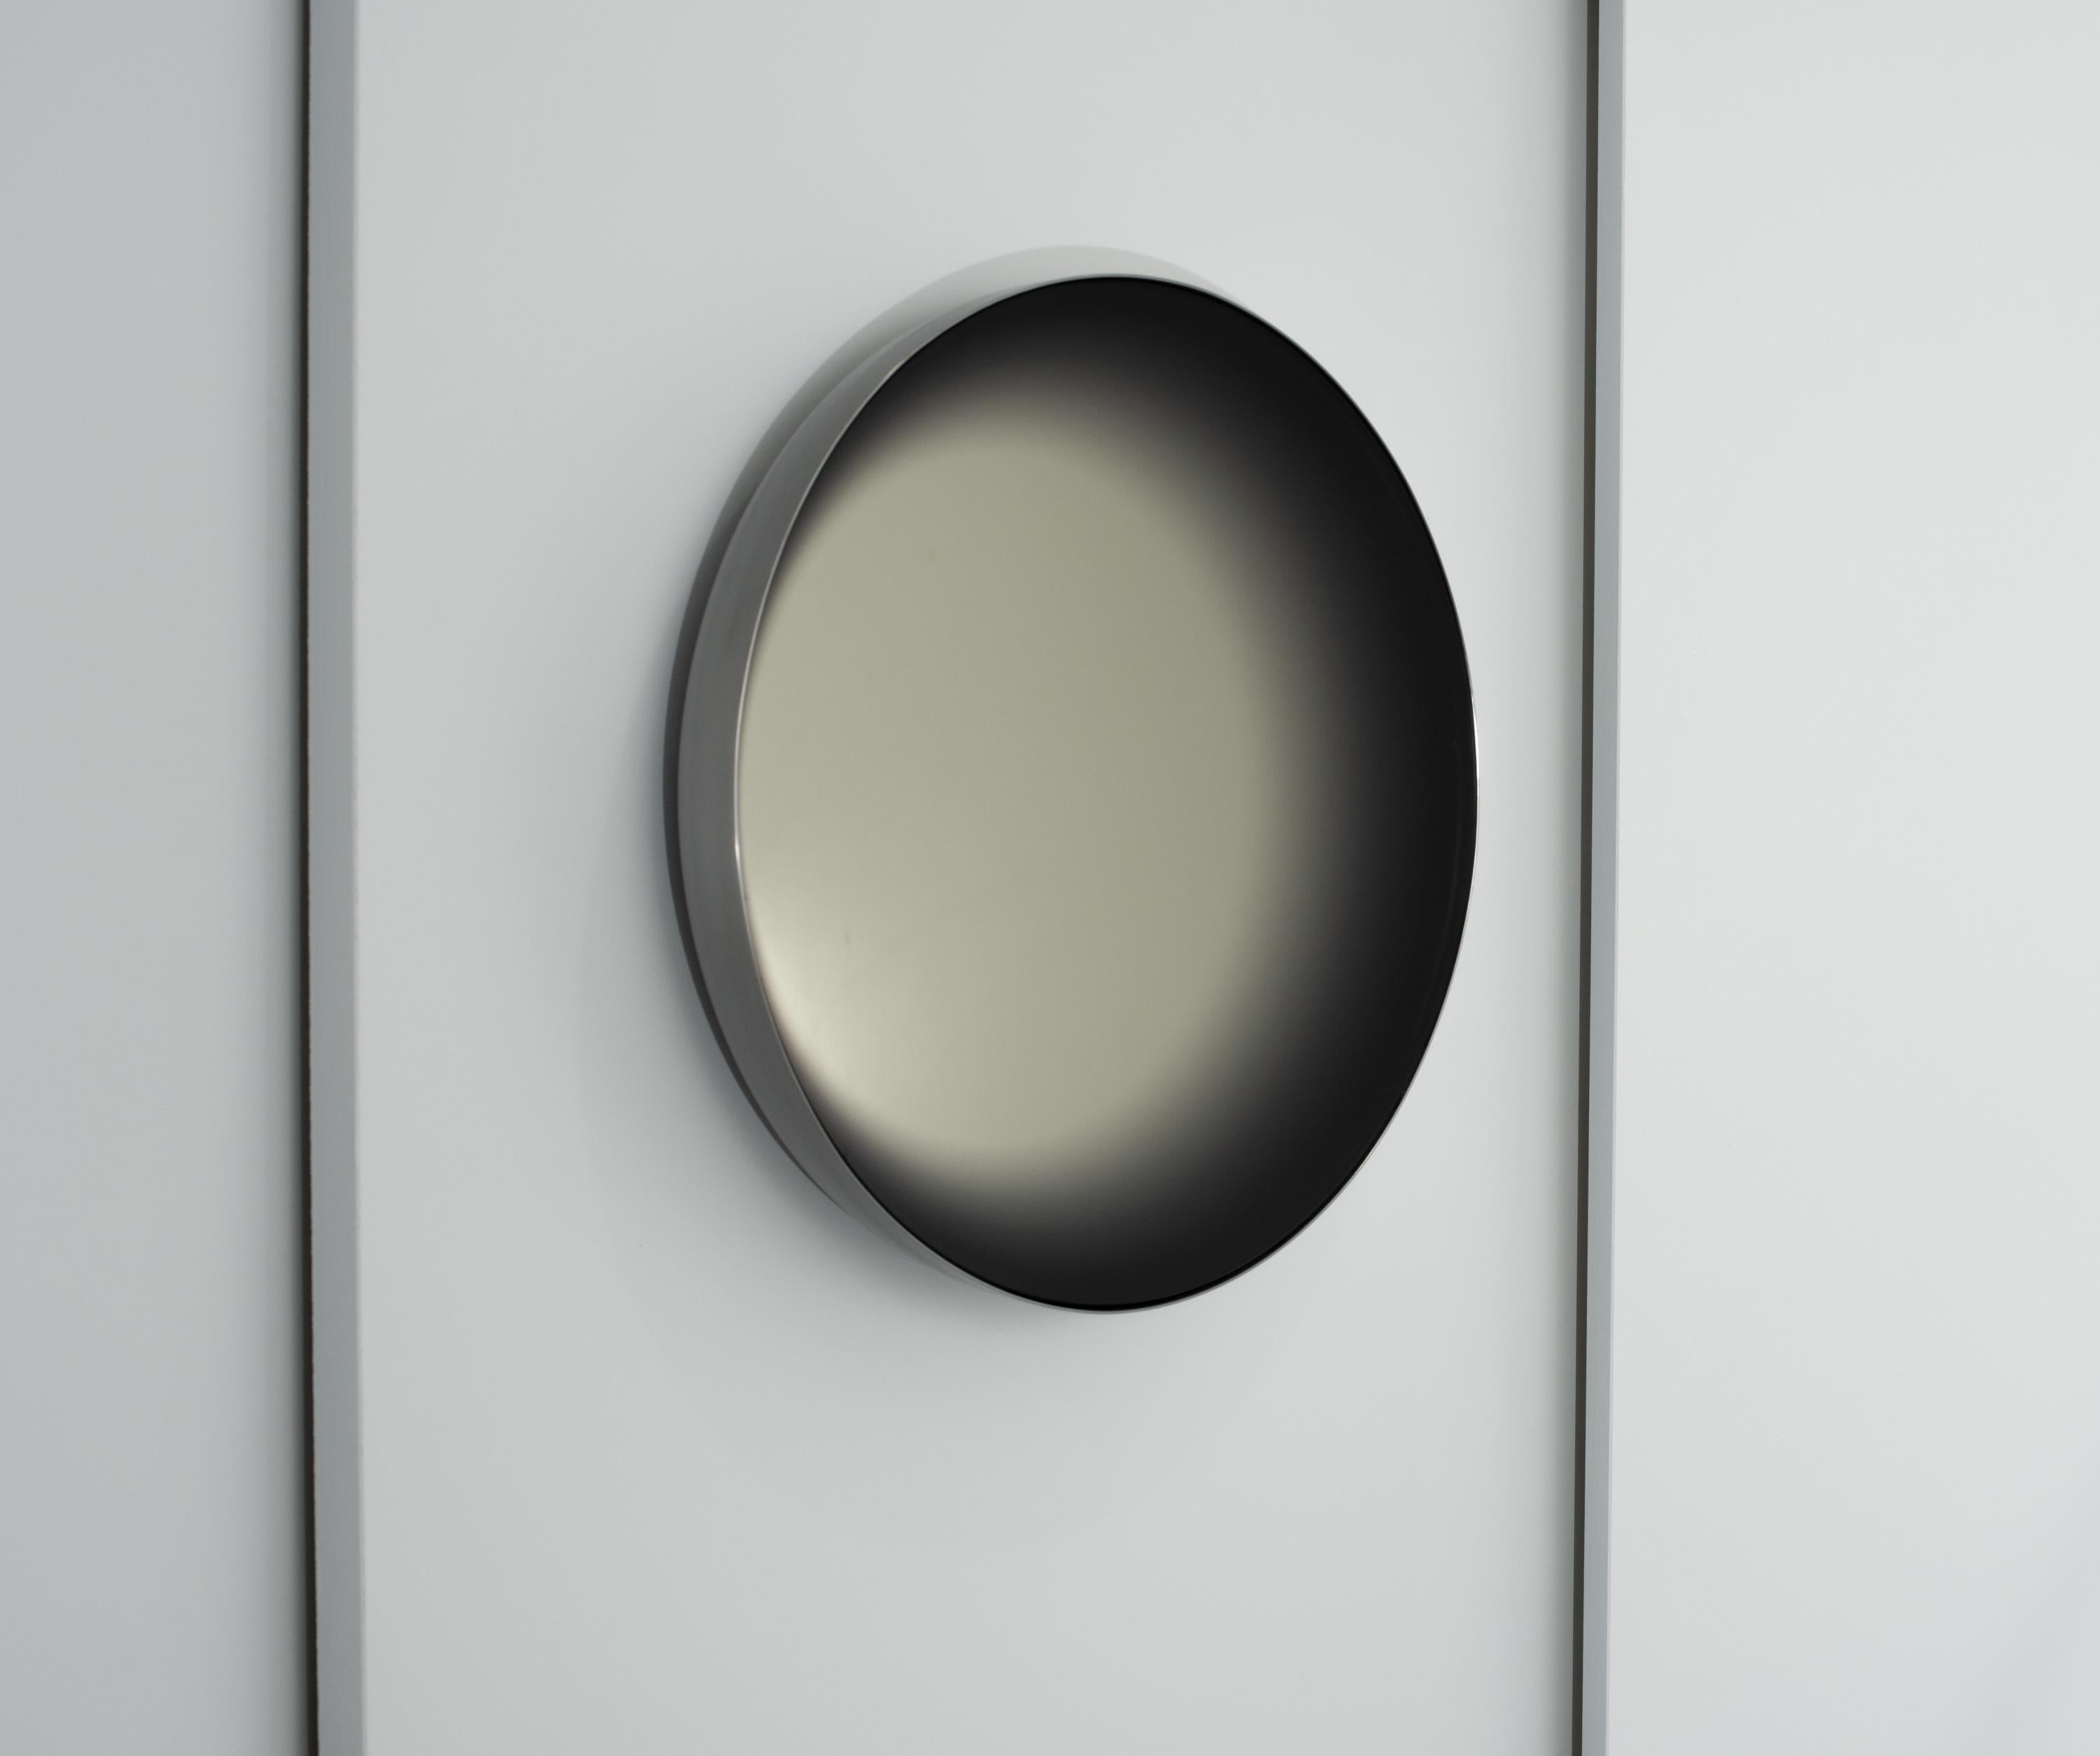 Concave convex mirror is an open edition piece created for Alt Material Exhibition, part of NGV (National Gallery of Victoria) Melbourne Design Week 2020. The brief was to design an object of use in response to the theme DUCTILITY, exploring